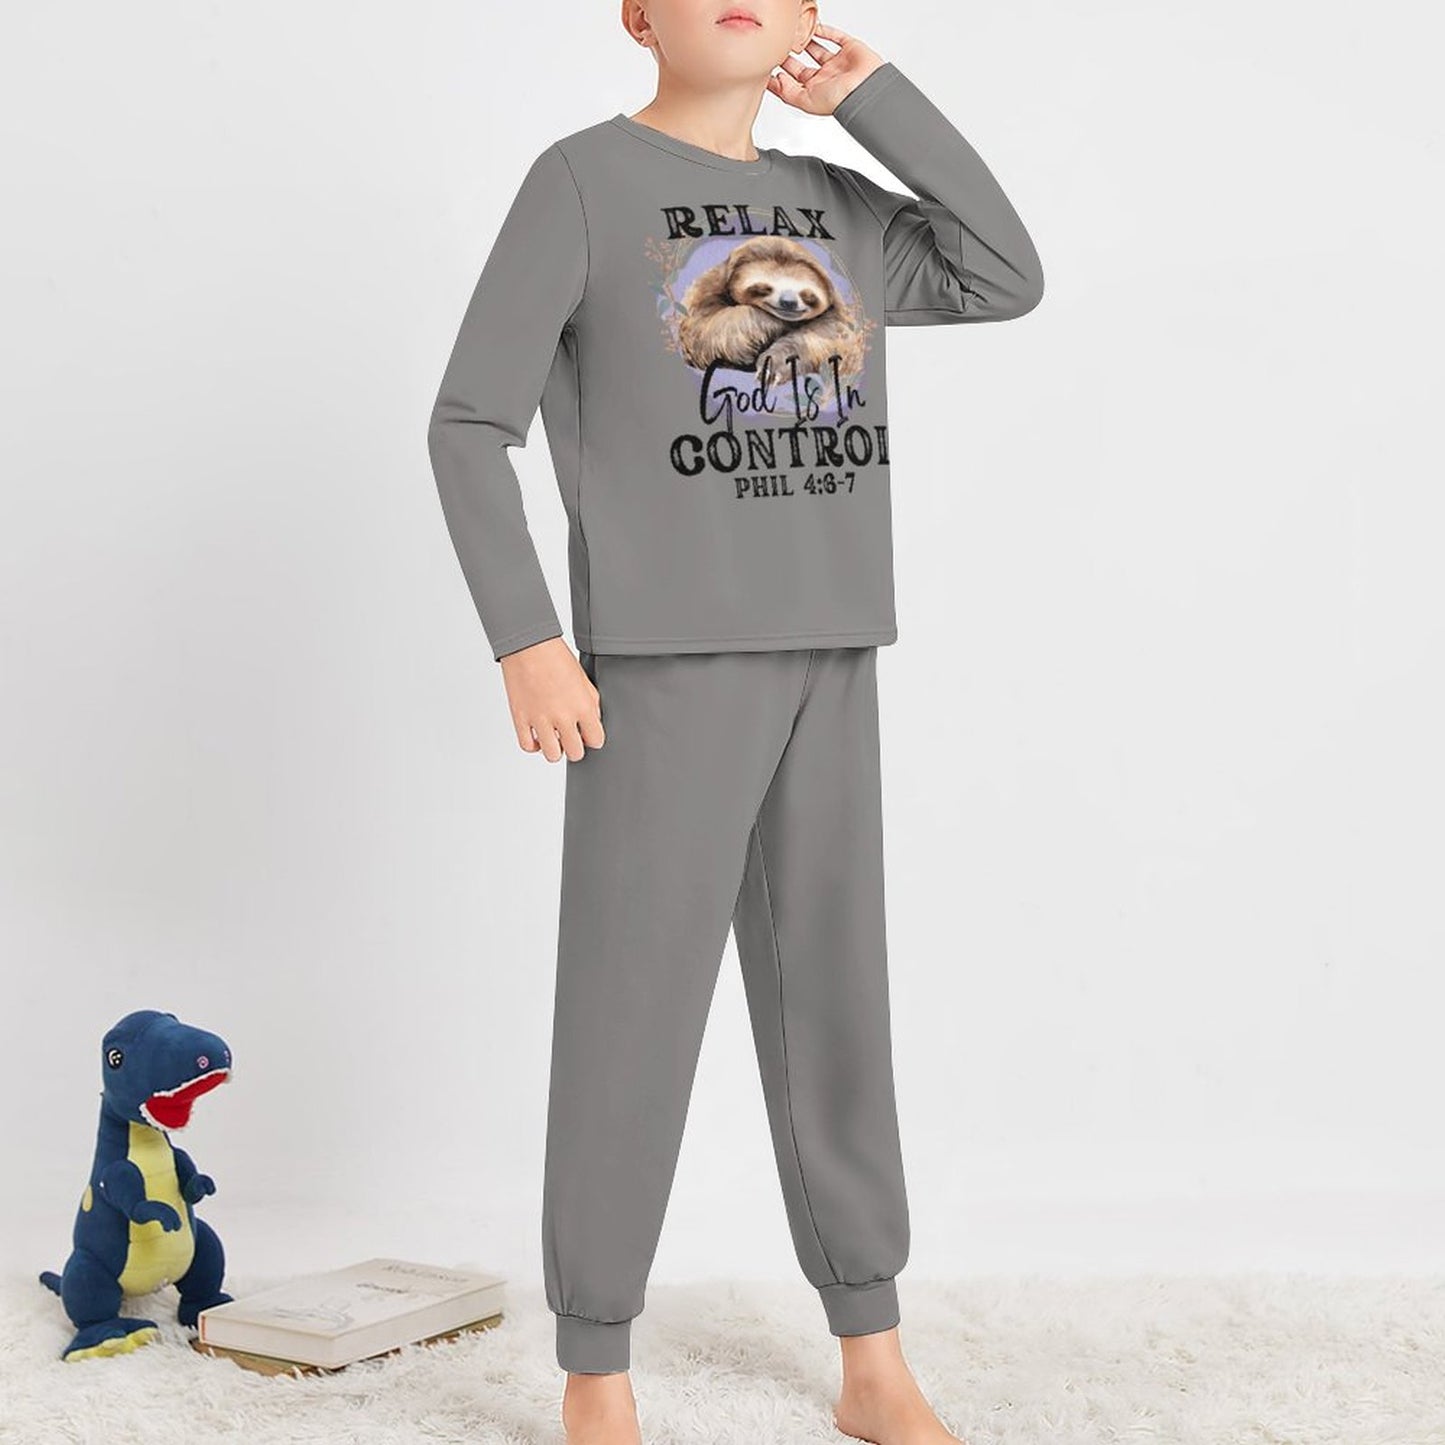 Relax God Is In Control Boy's Toddler Christian pajamas